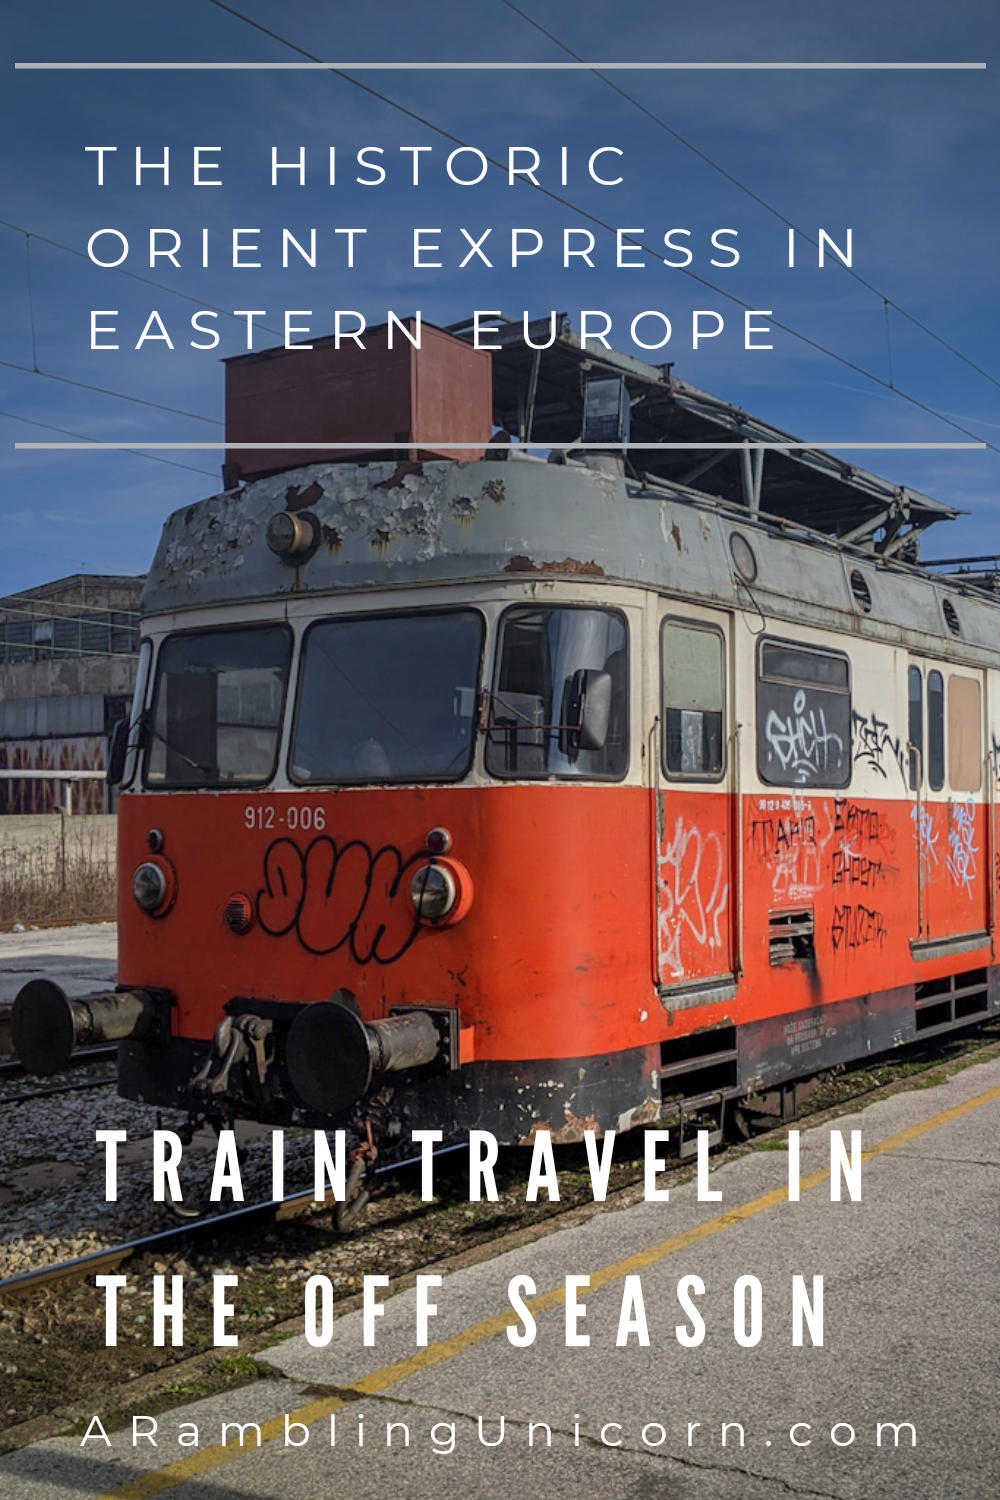 Travelling along the historic Orient Express route in Eastern Europe during the off season isn't for the faint-hearted. Fewer trains run in the winter than in summertime, and those do run are agonizingly slow. But, it does make for a memorable adventure.